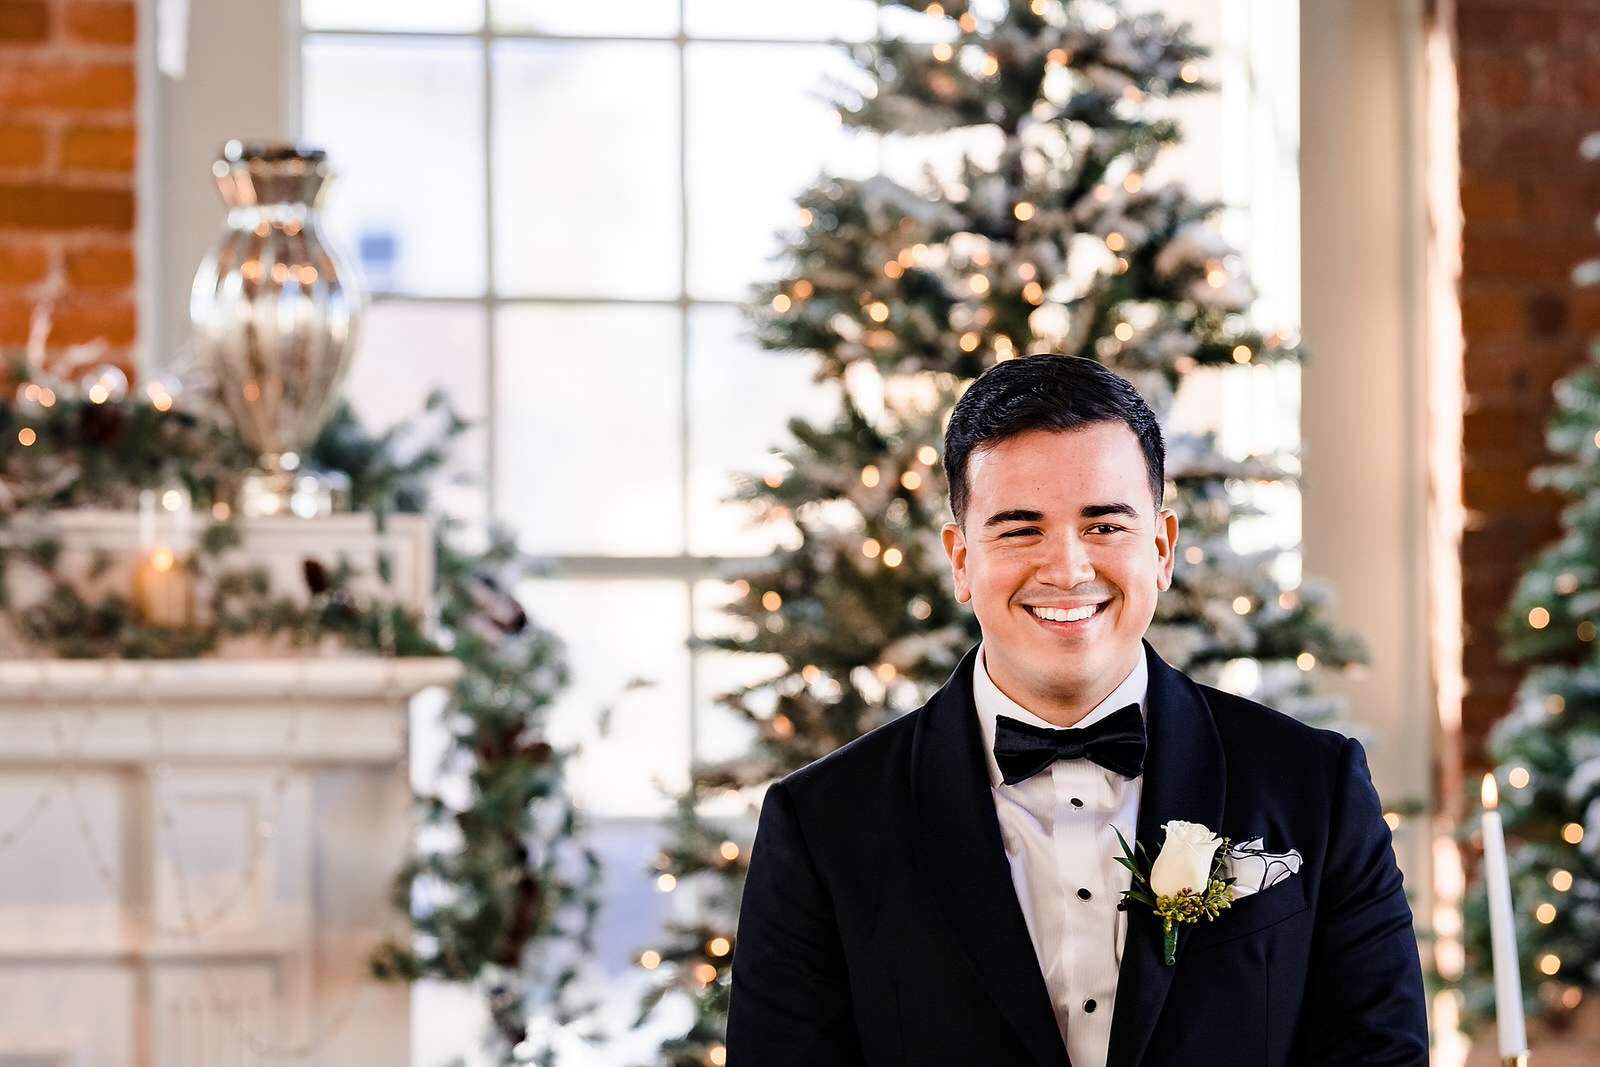 The groom's reaction at this Christmas wedding is so sweet